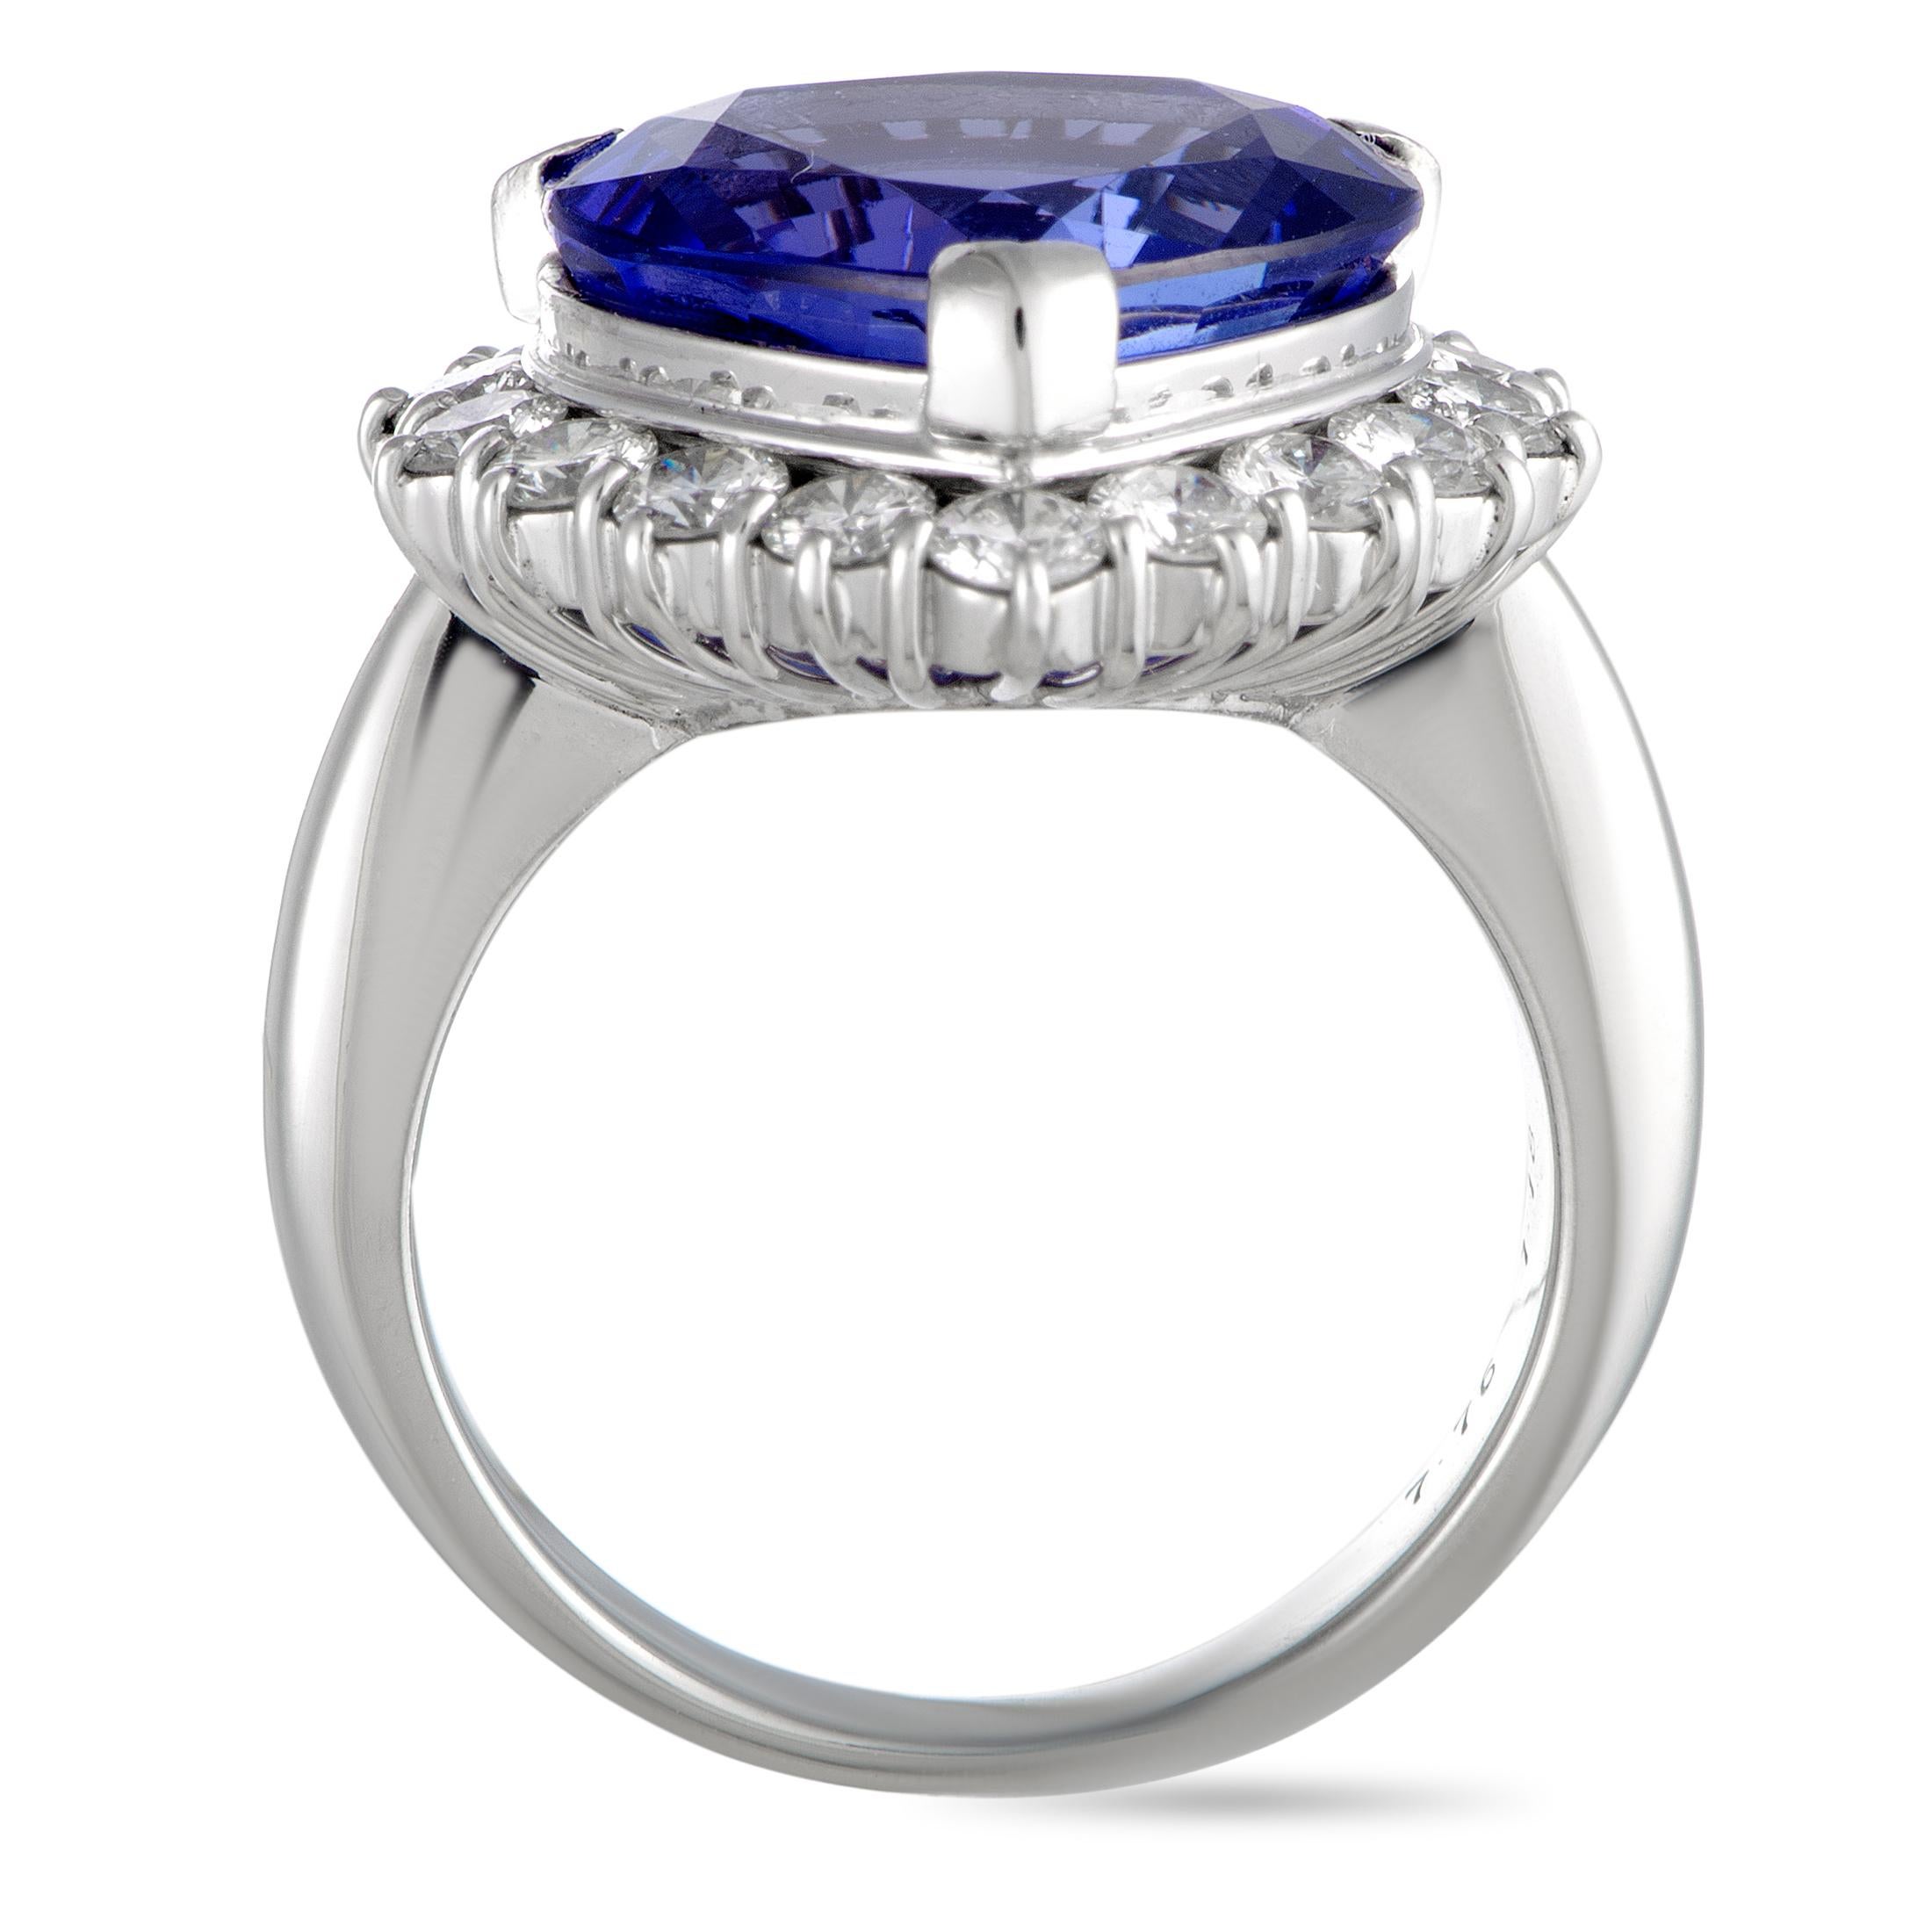 This ring is made of platinum and weighs 13.5 grams, boasting band thickness of 3 mm and top height of 7 mm, while top dimensions measure 18 by 18 mm. The ring is set with a tanzanite that weighs 7.76 carats and with diamonds that total 1.18